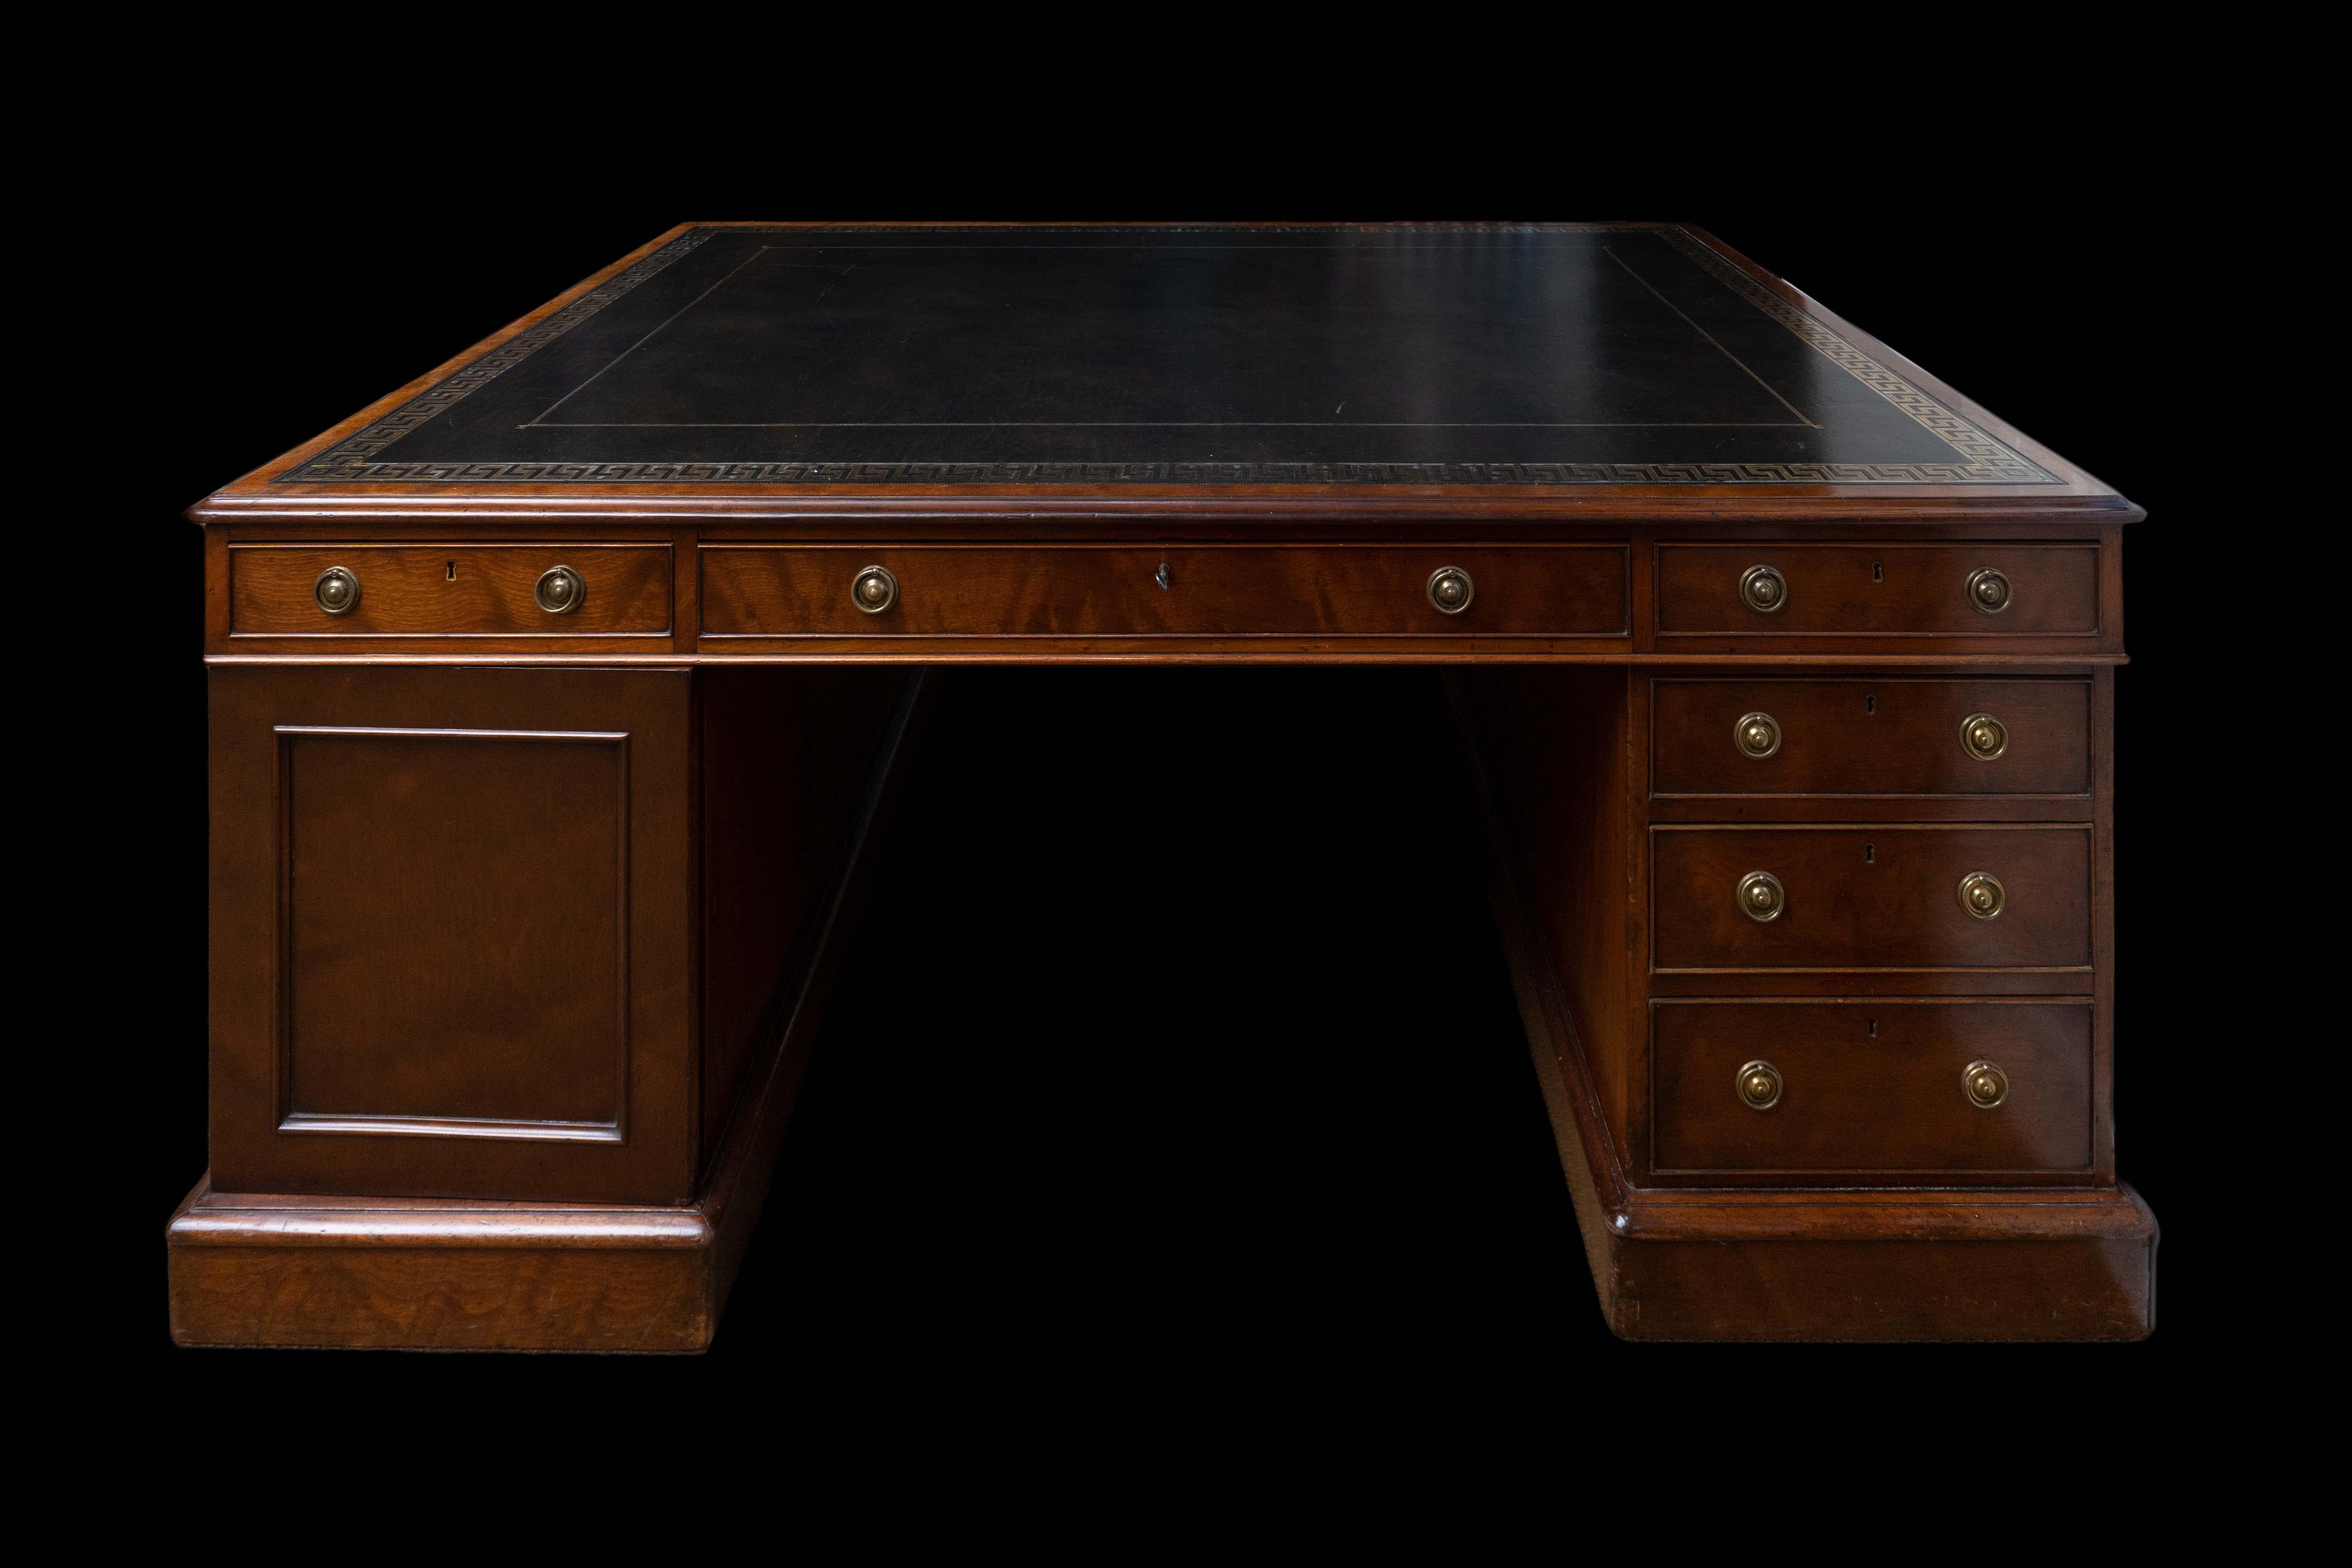 This exceptional Victorian mahogany Partner's desk is a true masterpiece of British furniture craftsmanship. The desk has been carefully restored in London, bringing it back to its former glory and ensuring that it will be a treasured addition to